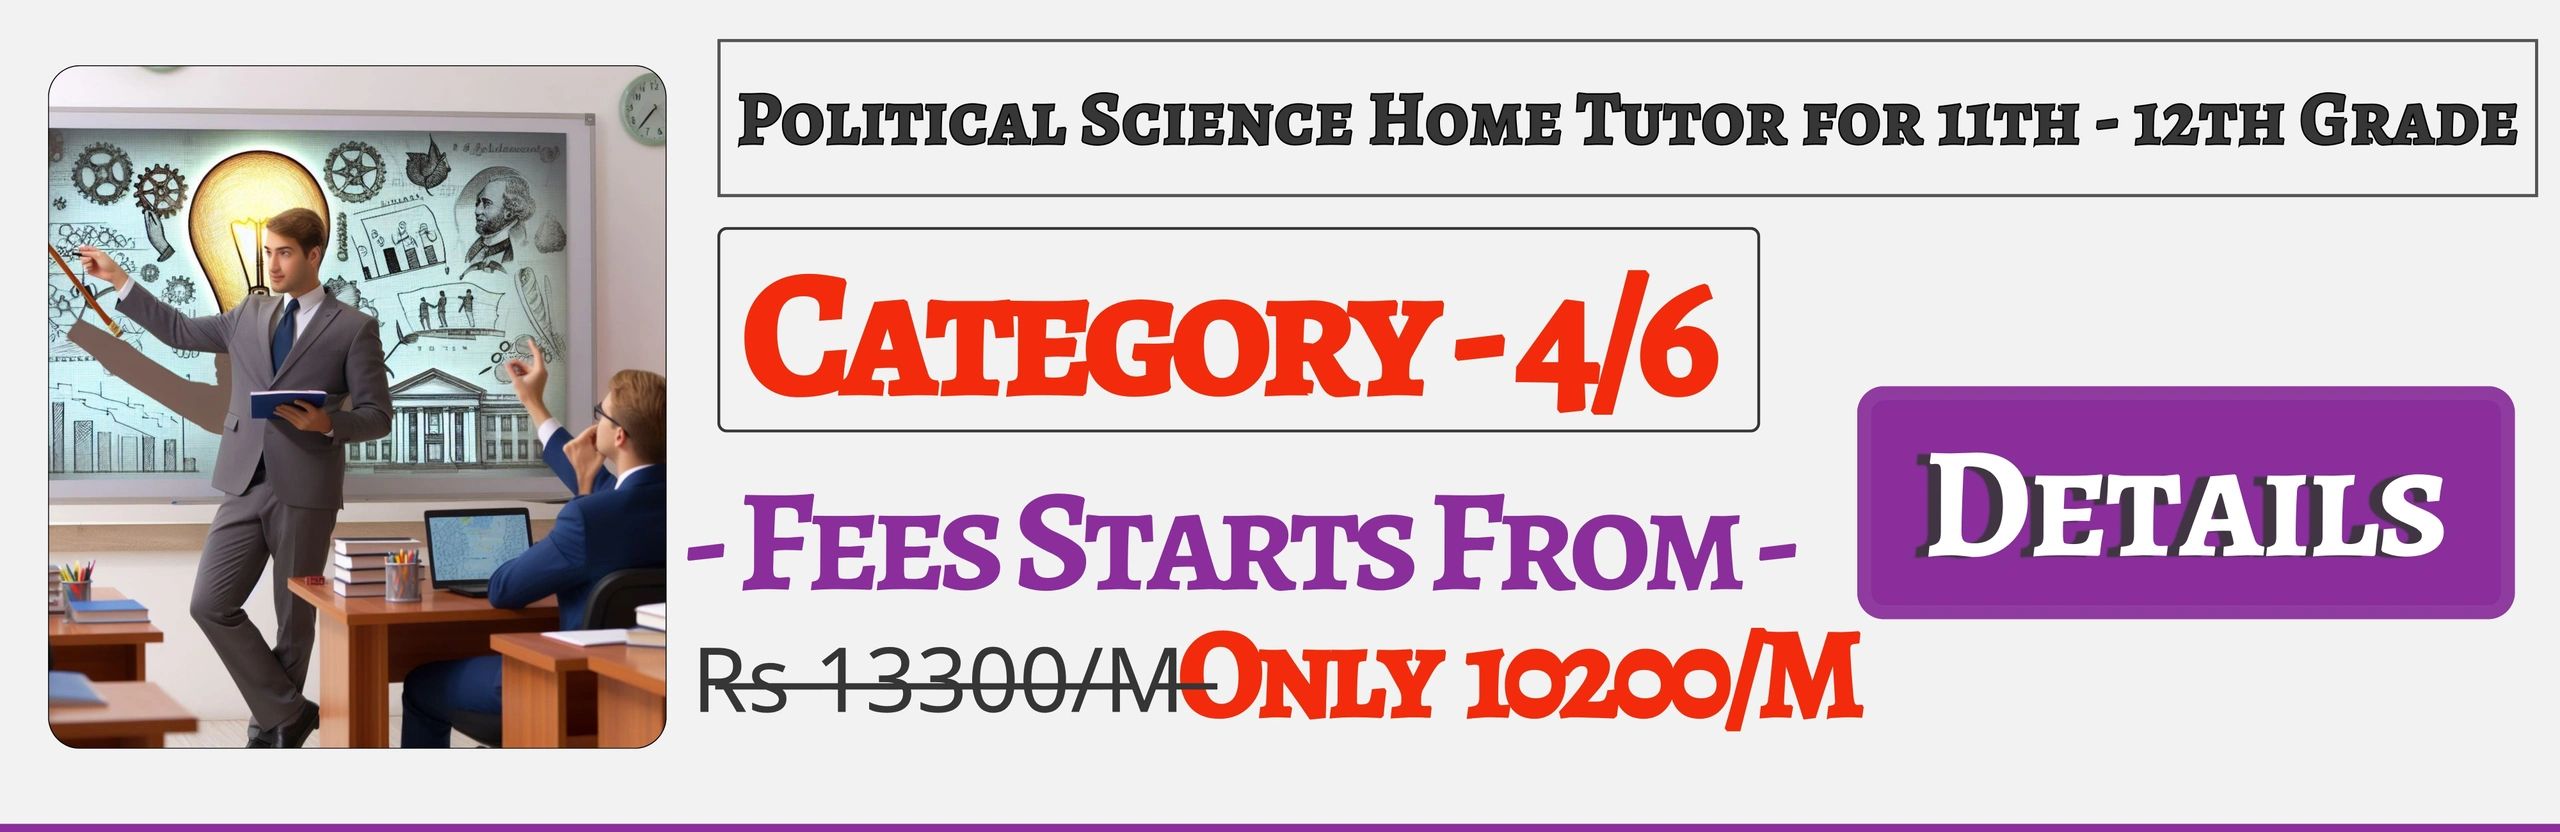 Book Best Nearby Political Science Home Tuition Tutors For 11th & 12th In Jaipur , Fees Only 10200/M